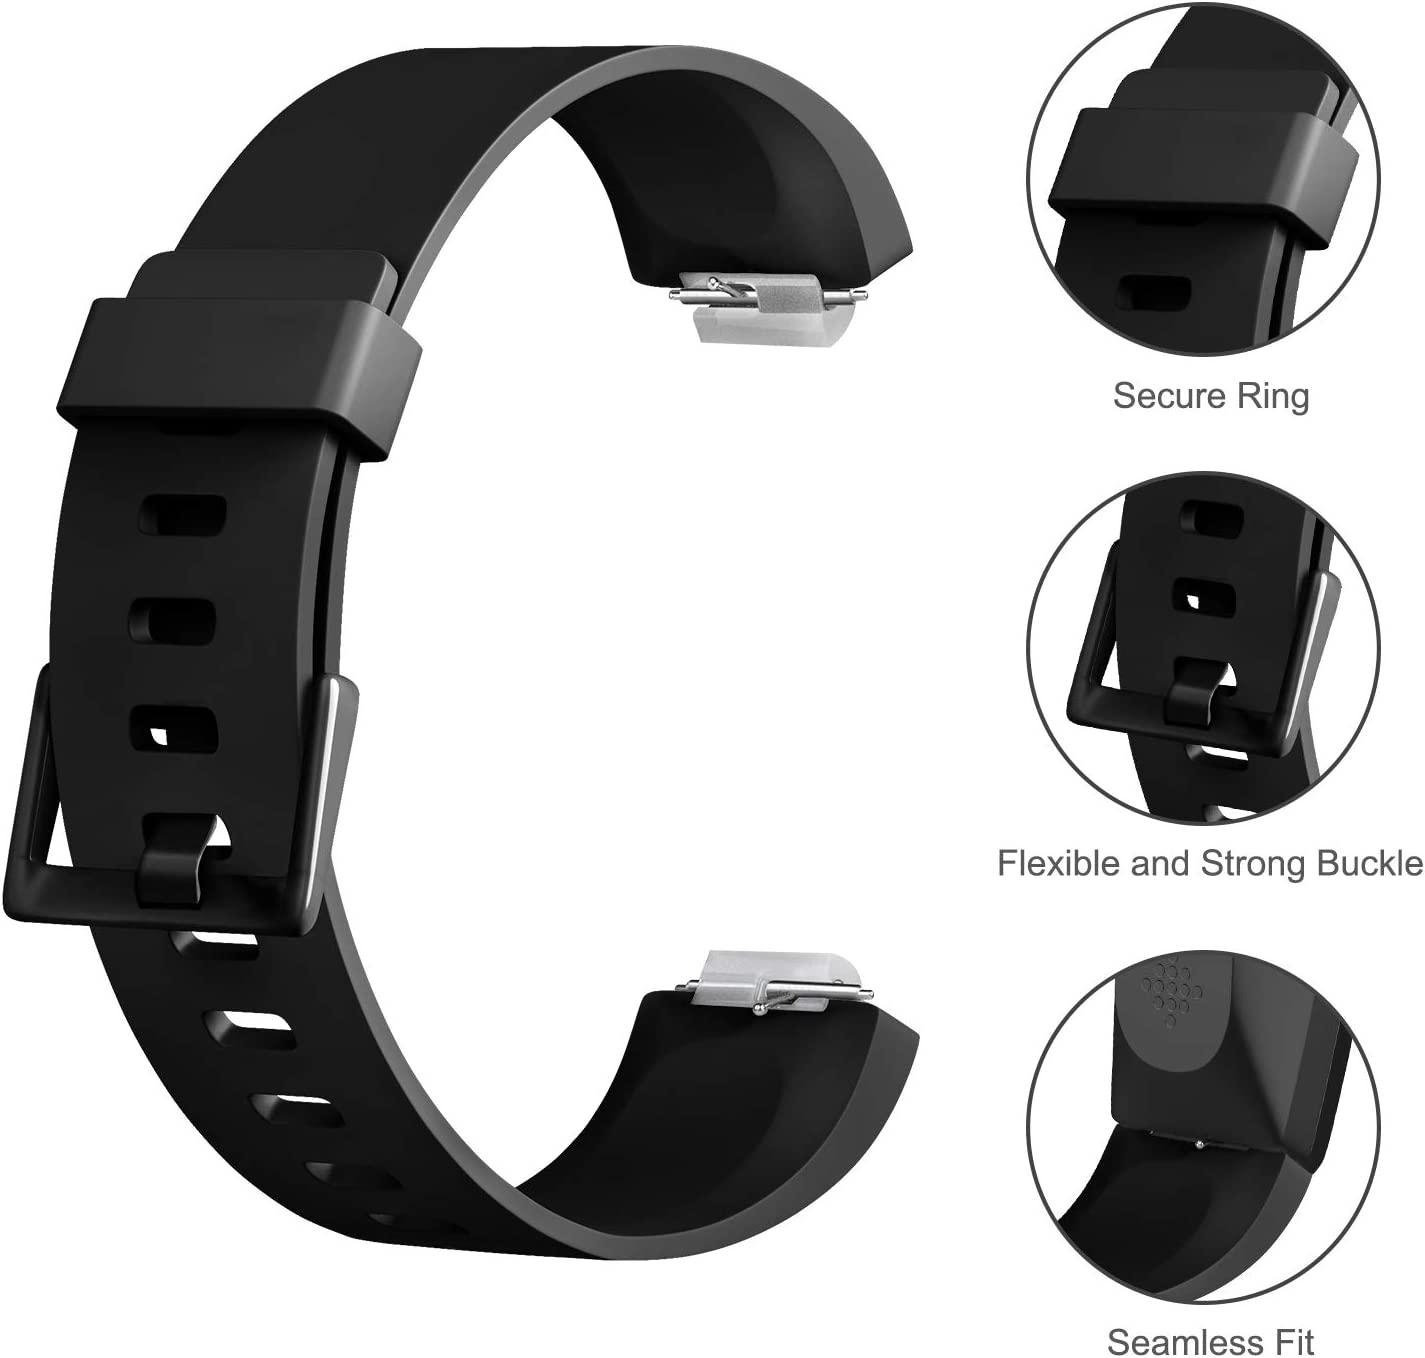 Compatible With Fitbit Ace 3 Strap For Kids, Soft Silicone Sport Wristband  Adjustable Accessory Bracelet Replacement Band Fitbit Ace 3/inspire 2 For B